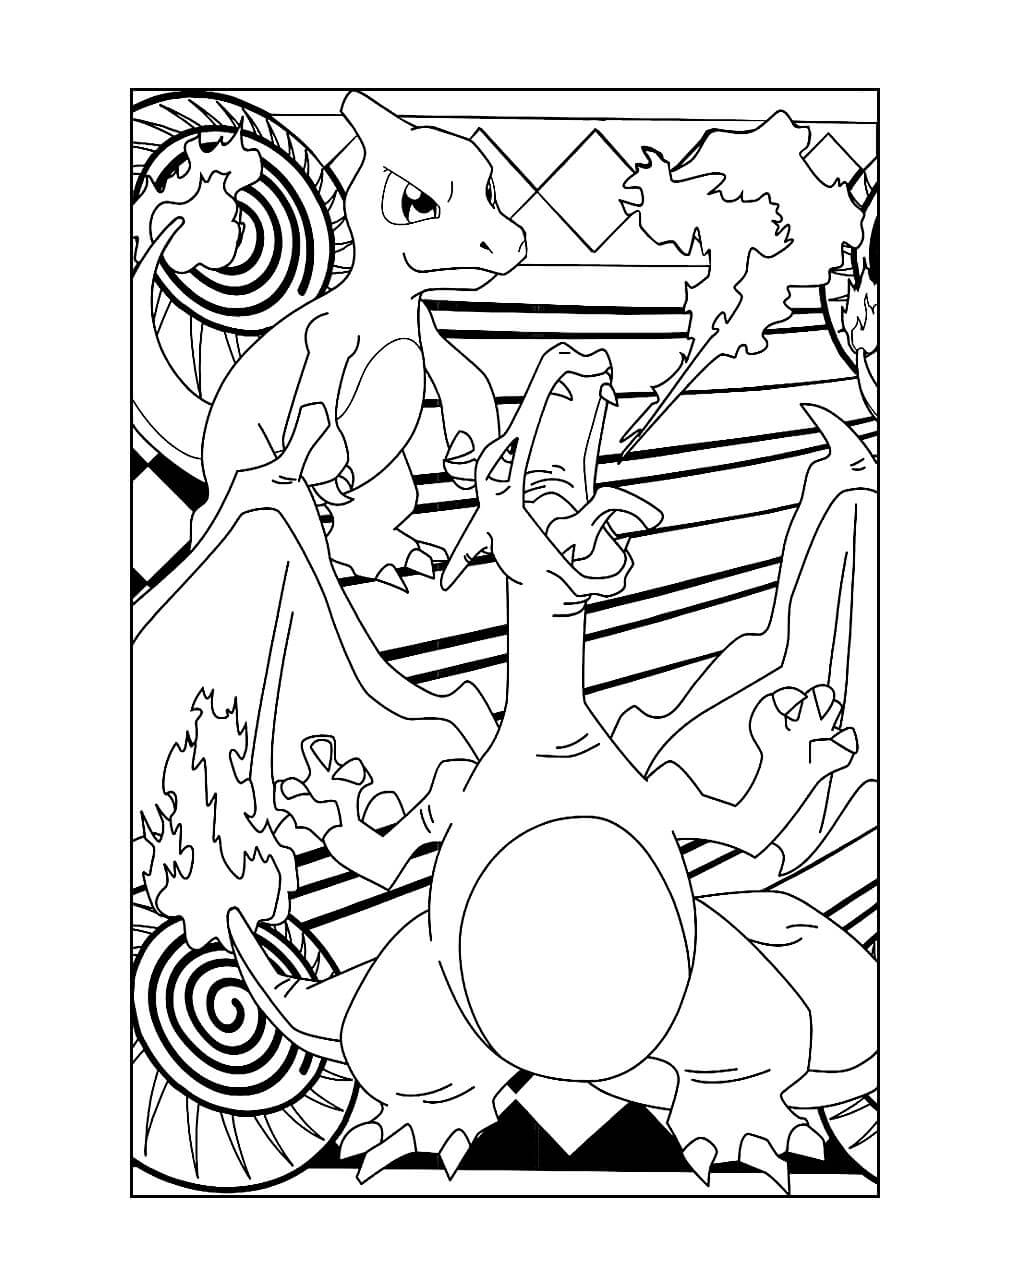 Pokemon Coloring Pages Coloring Rocks Charizard learns the following moves when it evolves in pokémon let's go pikachu & let's go eevee. pokemon coloring pages coloring rocks